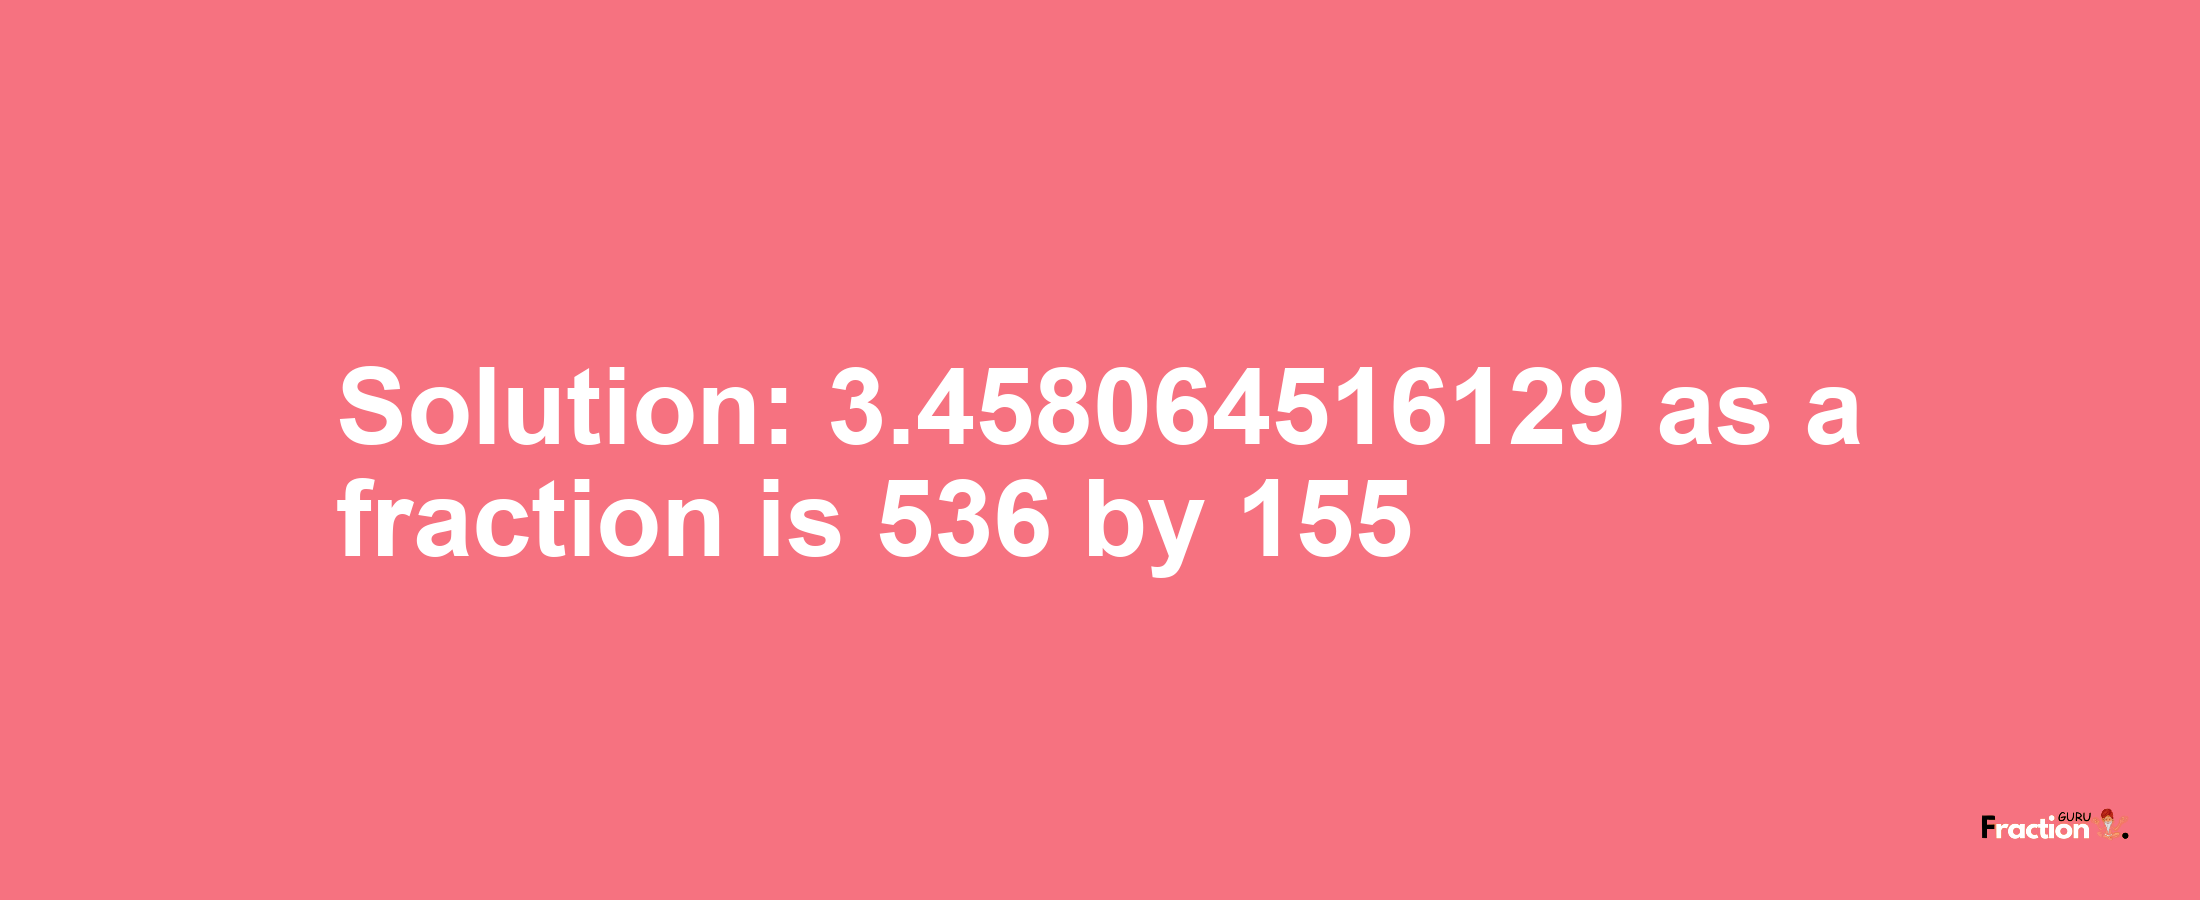 Solution:3.458064516129 as a fraction is 536/155